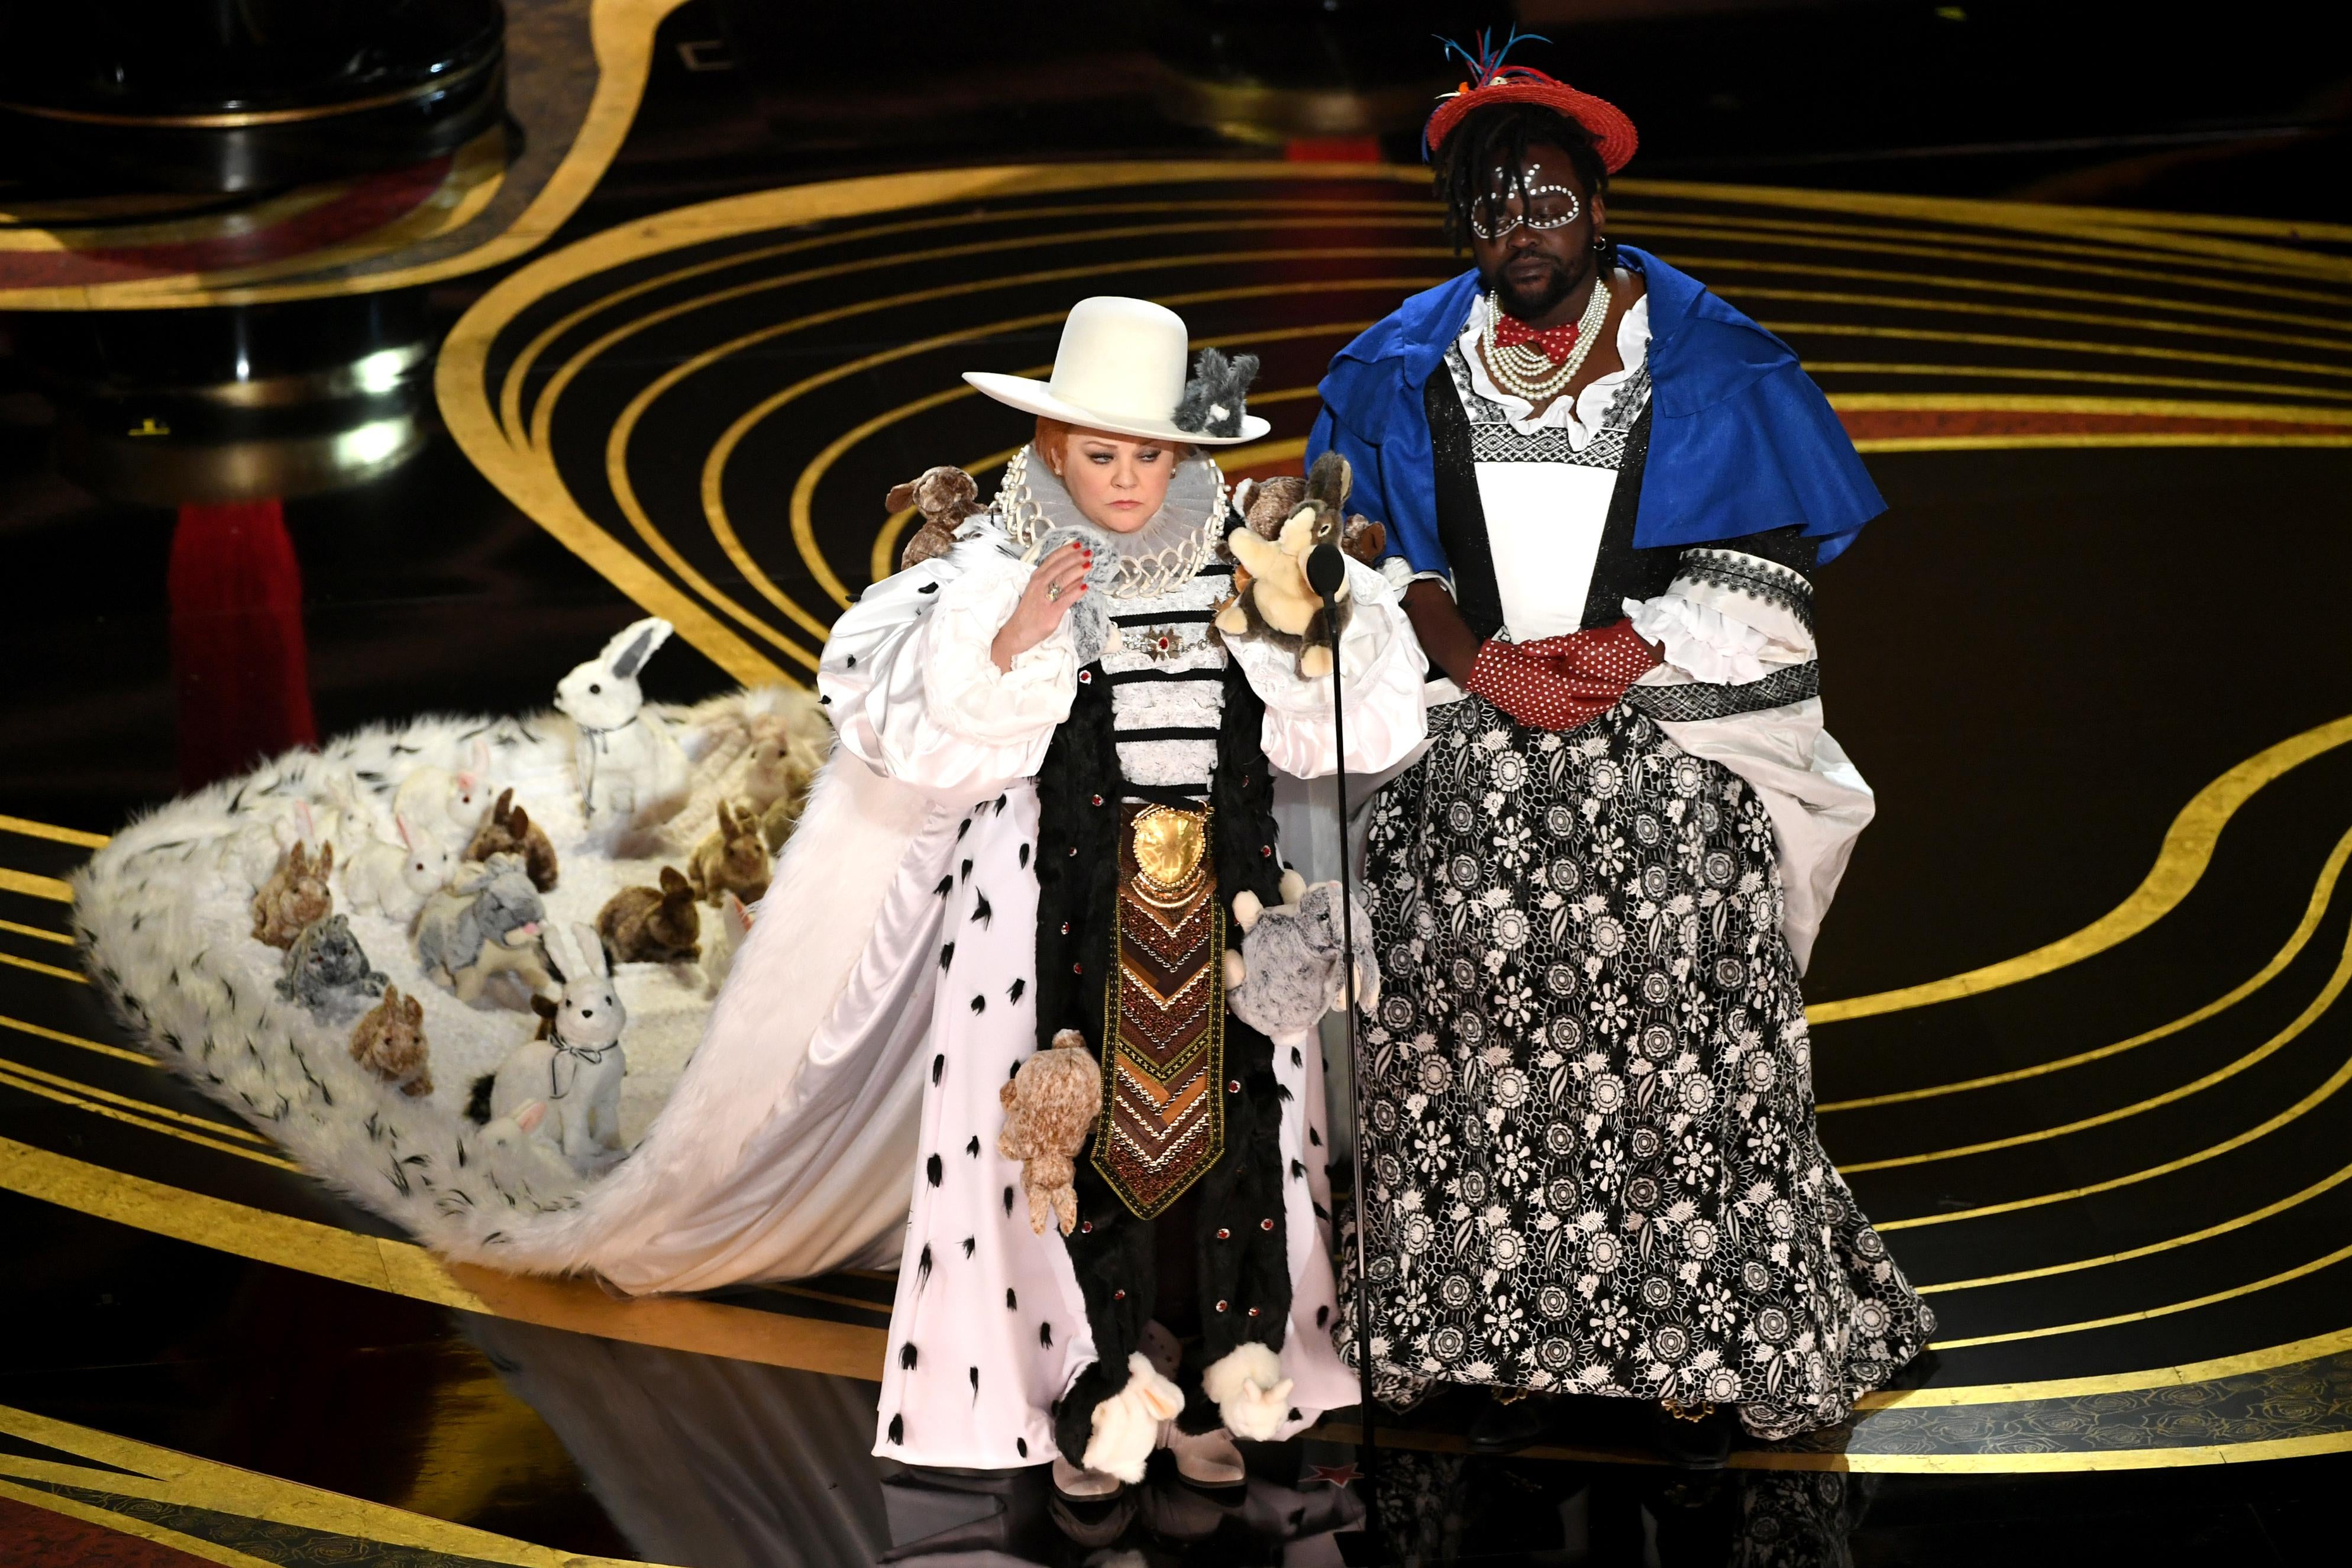 Melissa McCarthy and Brian Tyree Henry in their outlandish Oscar duds.